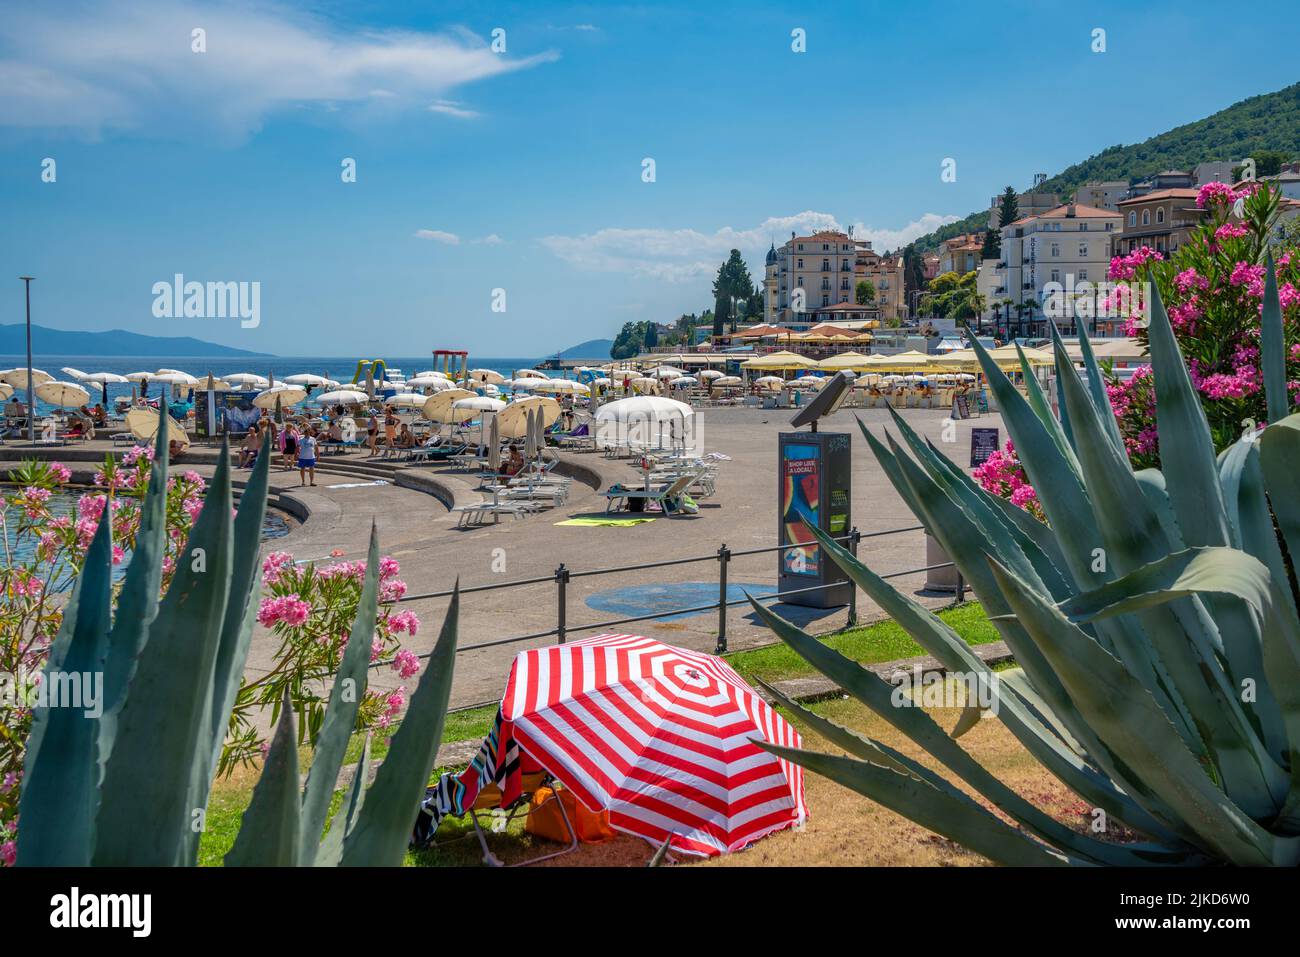 View of restaurants and sunshades on The Lungomare promenade in the town of Opatija, Opatija, Kvarner Bay, Croatia, Europe Stock Photo